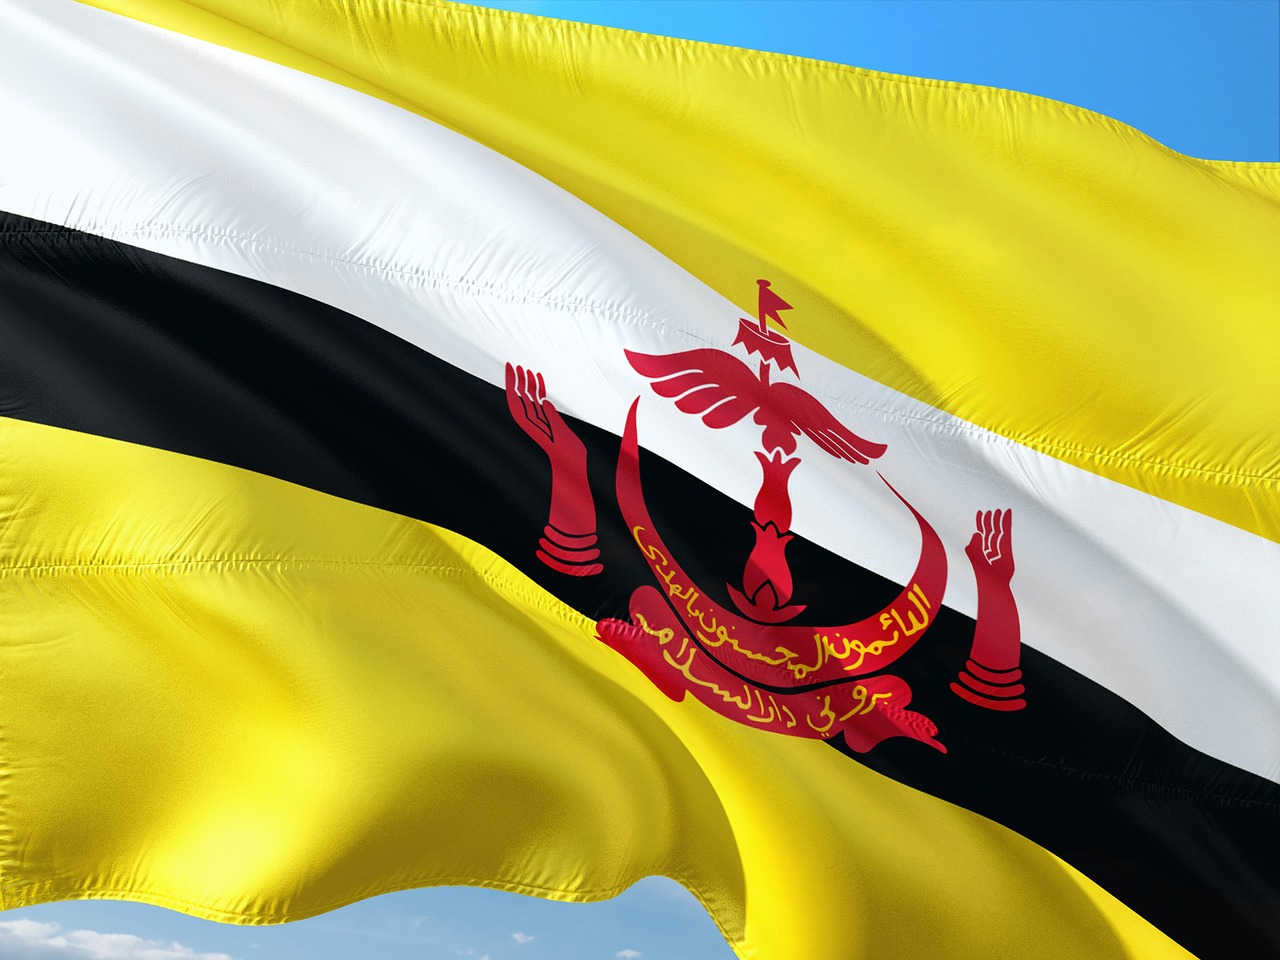 Brunei introduces stoning to death for being gay